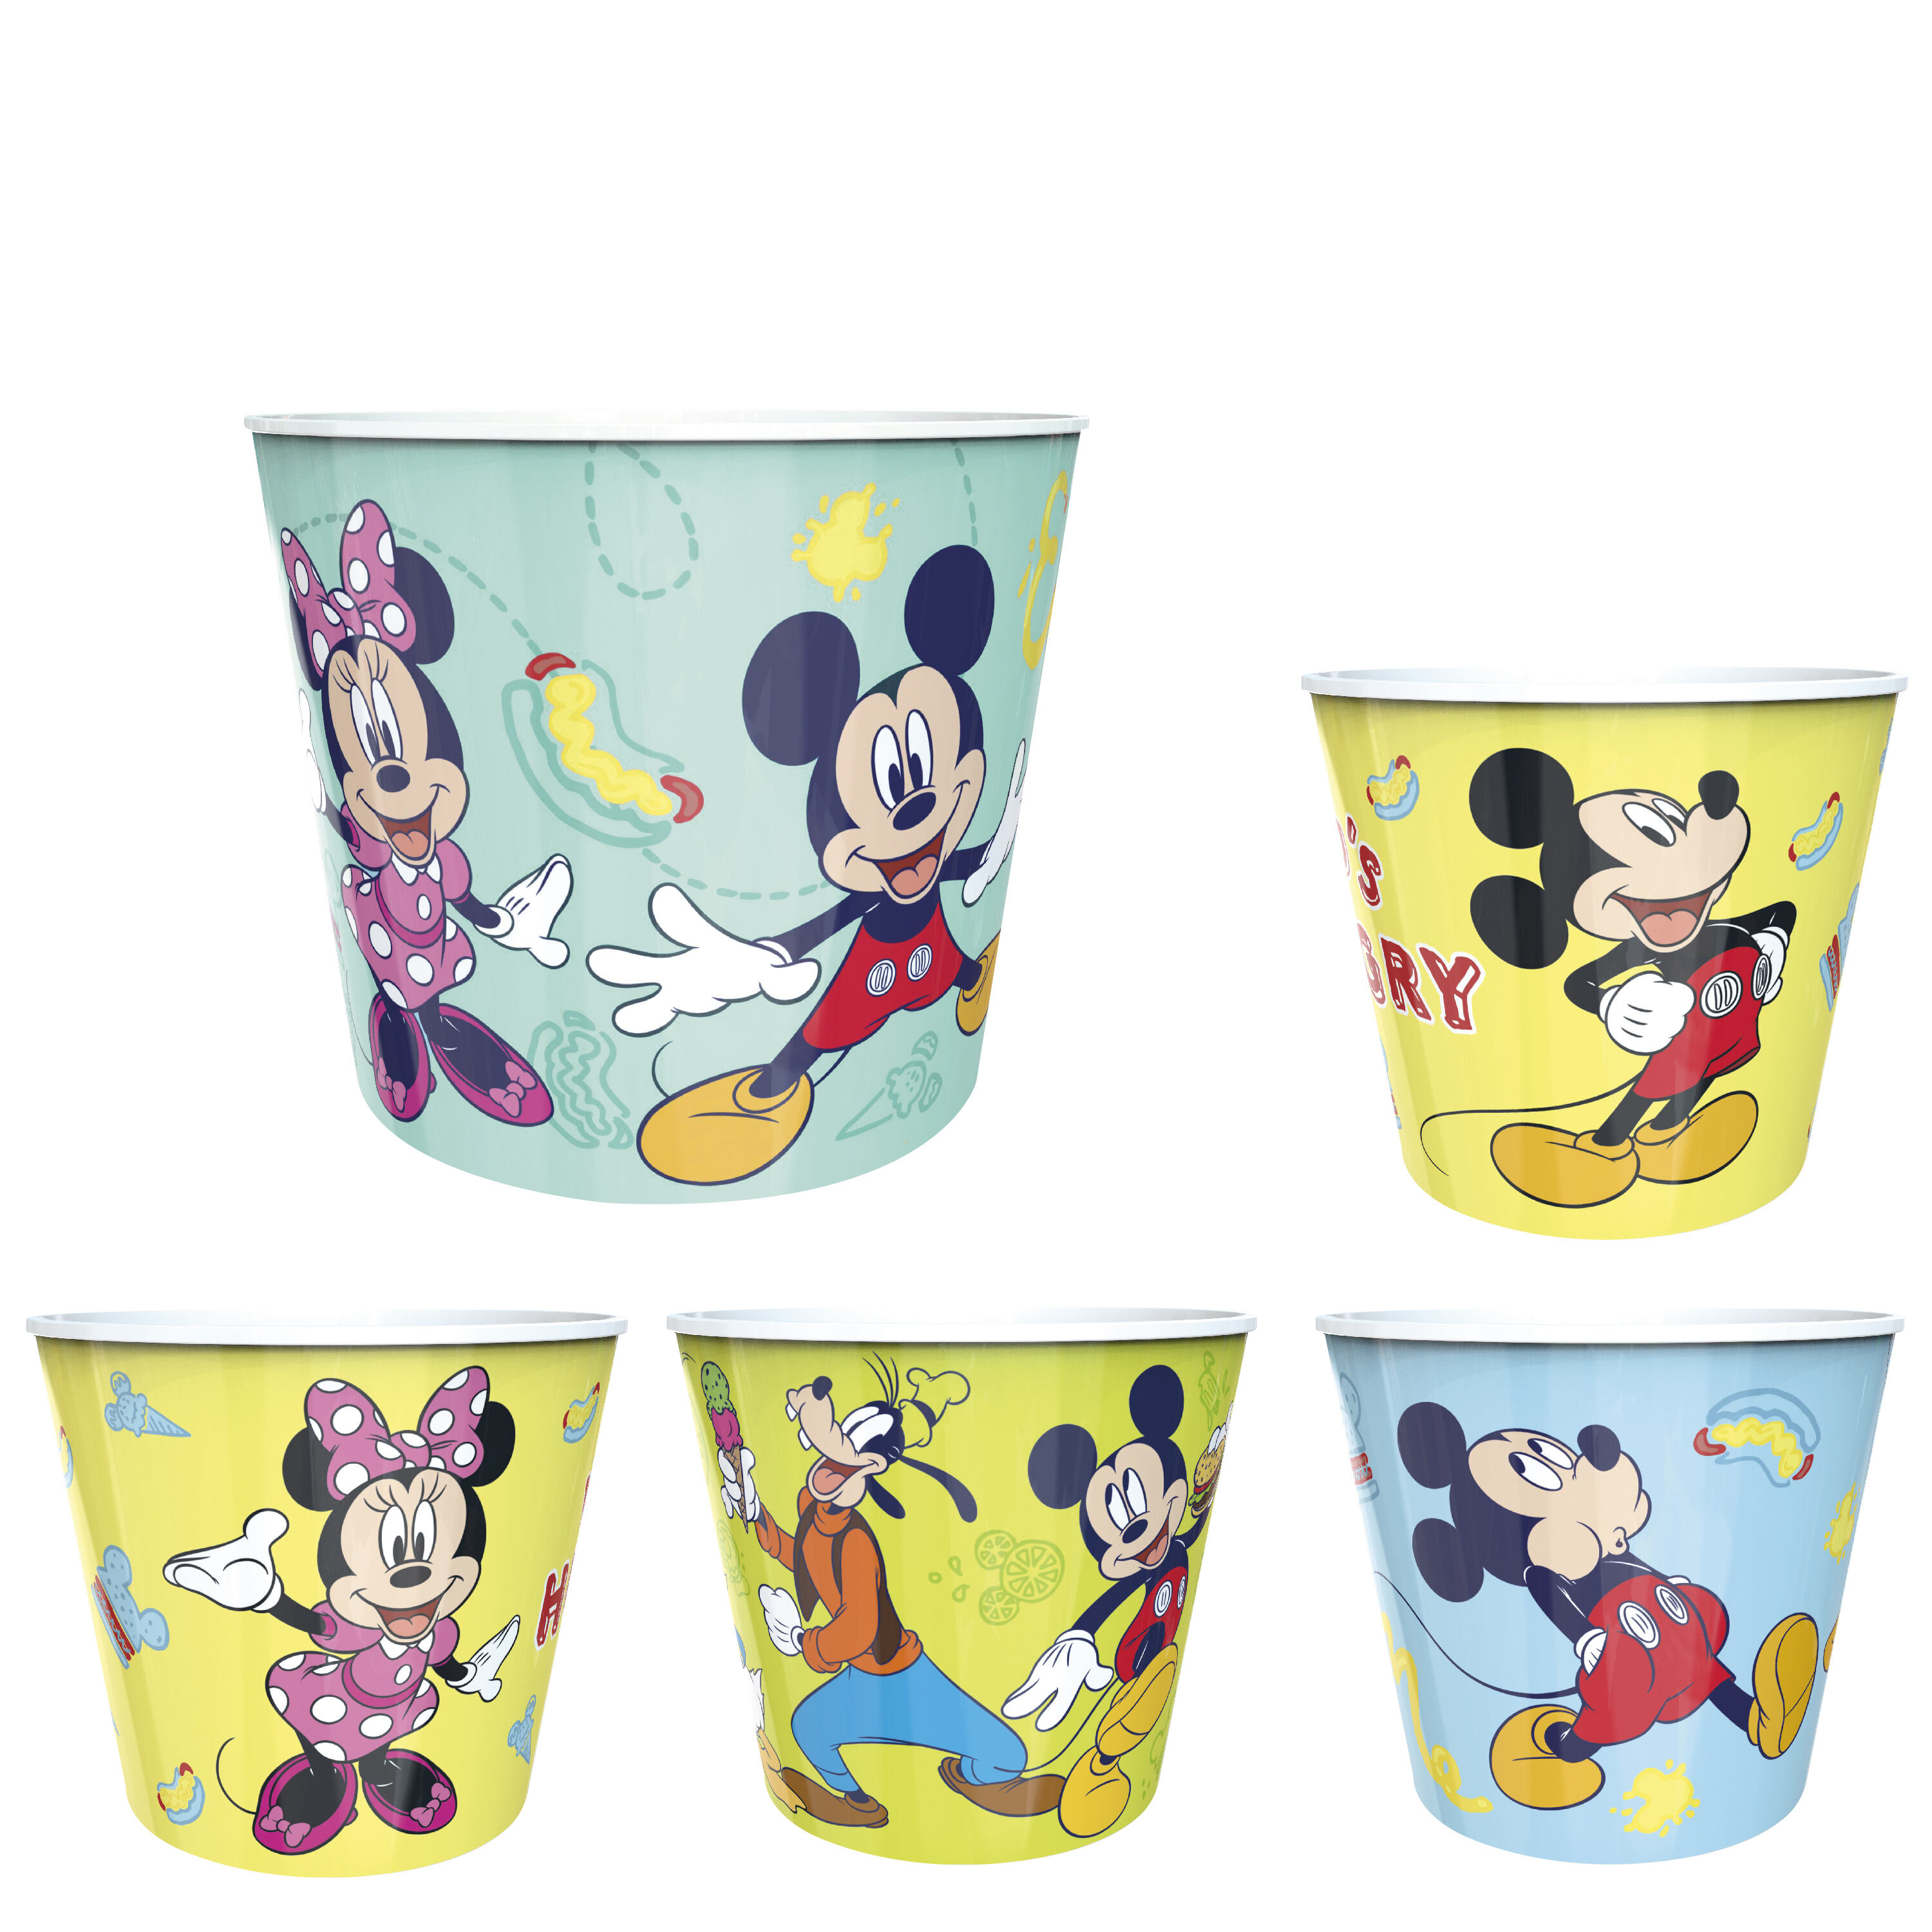 4 x Disney yellow plastic bowls Mickey Minnie Mouse Donald Duck NEW 